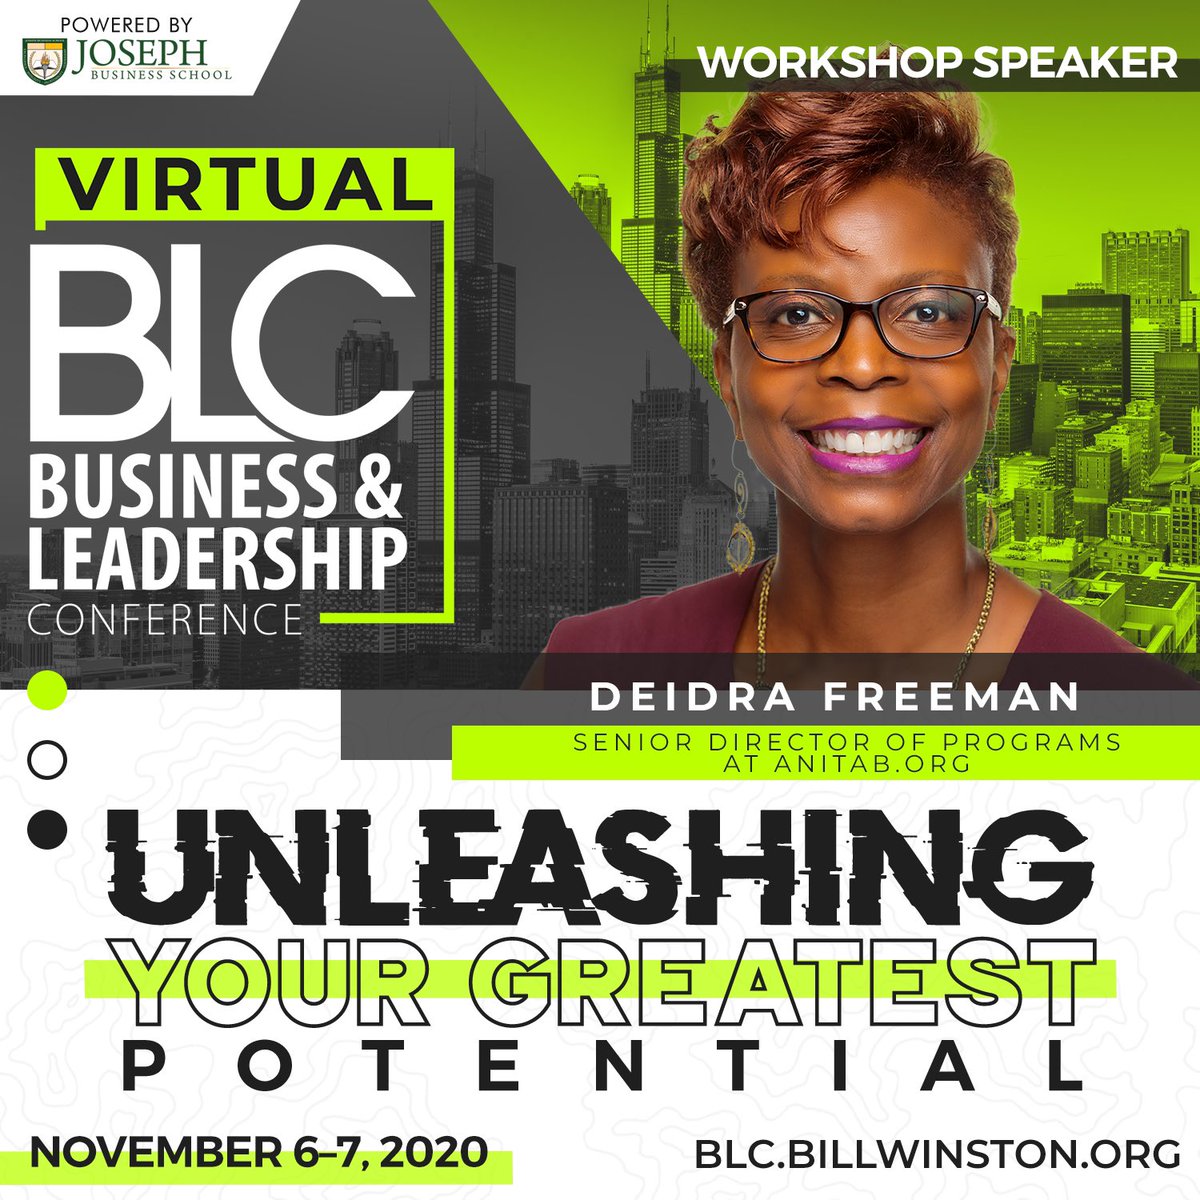 Join me at the 2020 Virtual @BLCJBS Unleashing Your Greatest Potential, on November 6-7. We will be discussing how you can unleash your greatest potential and make a difference in the world today. Register now for FULL COMPLIMENTARY ACCESS. bit.ly/BLCJBS
@JBSedu